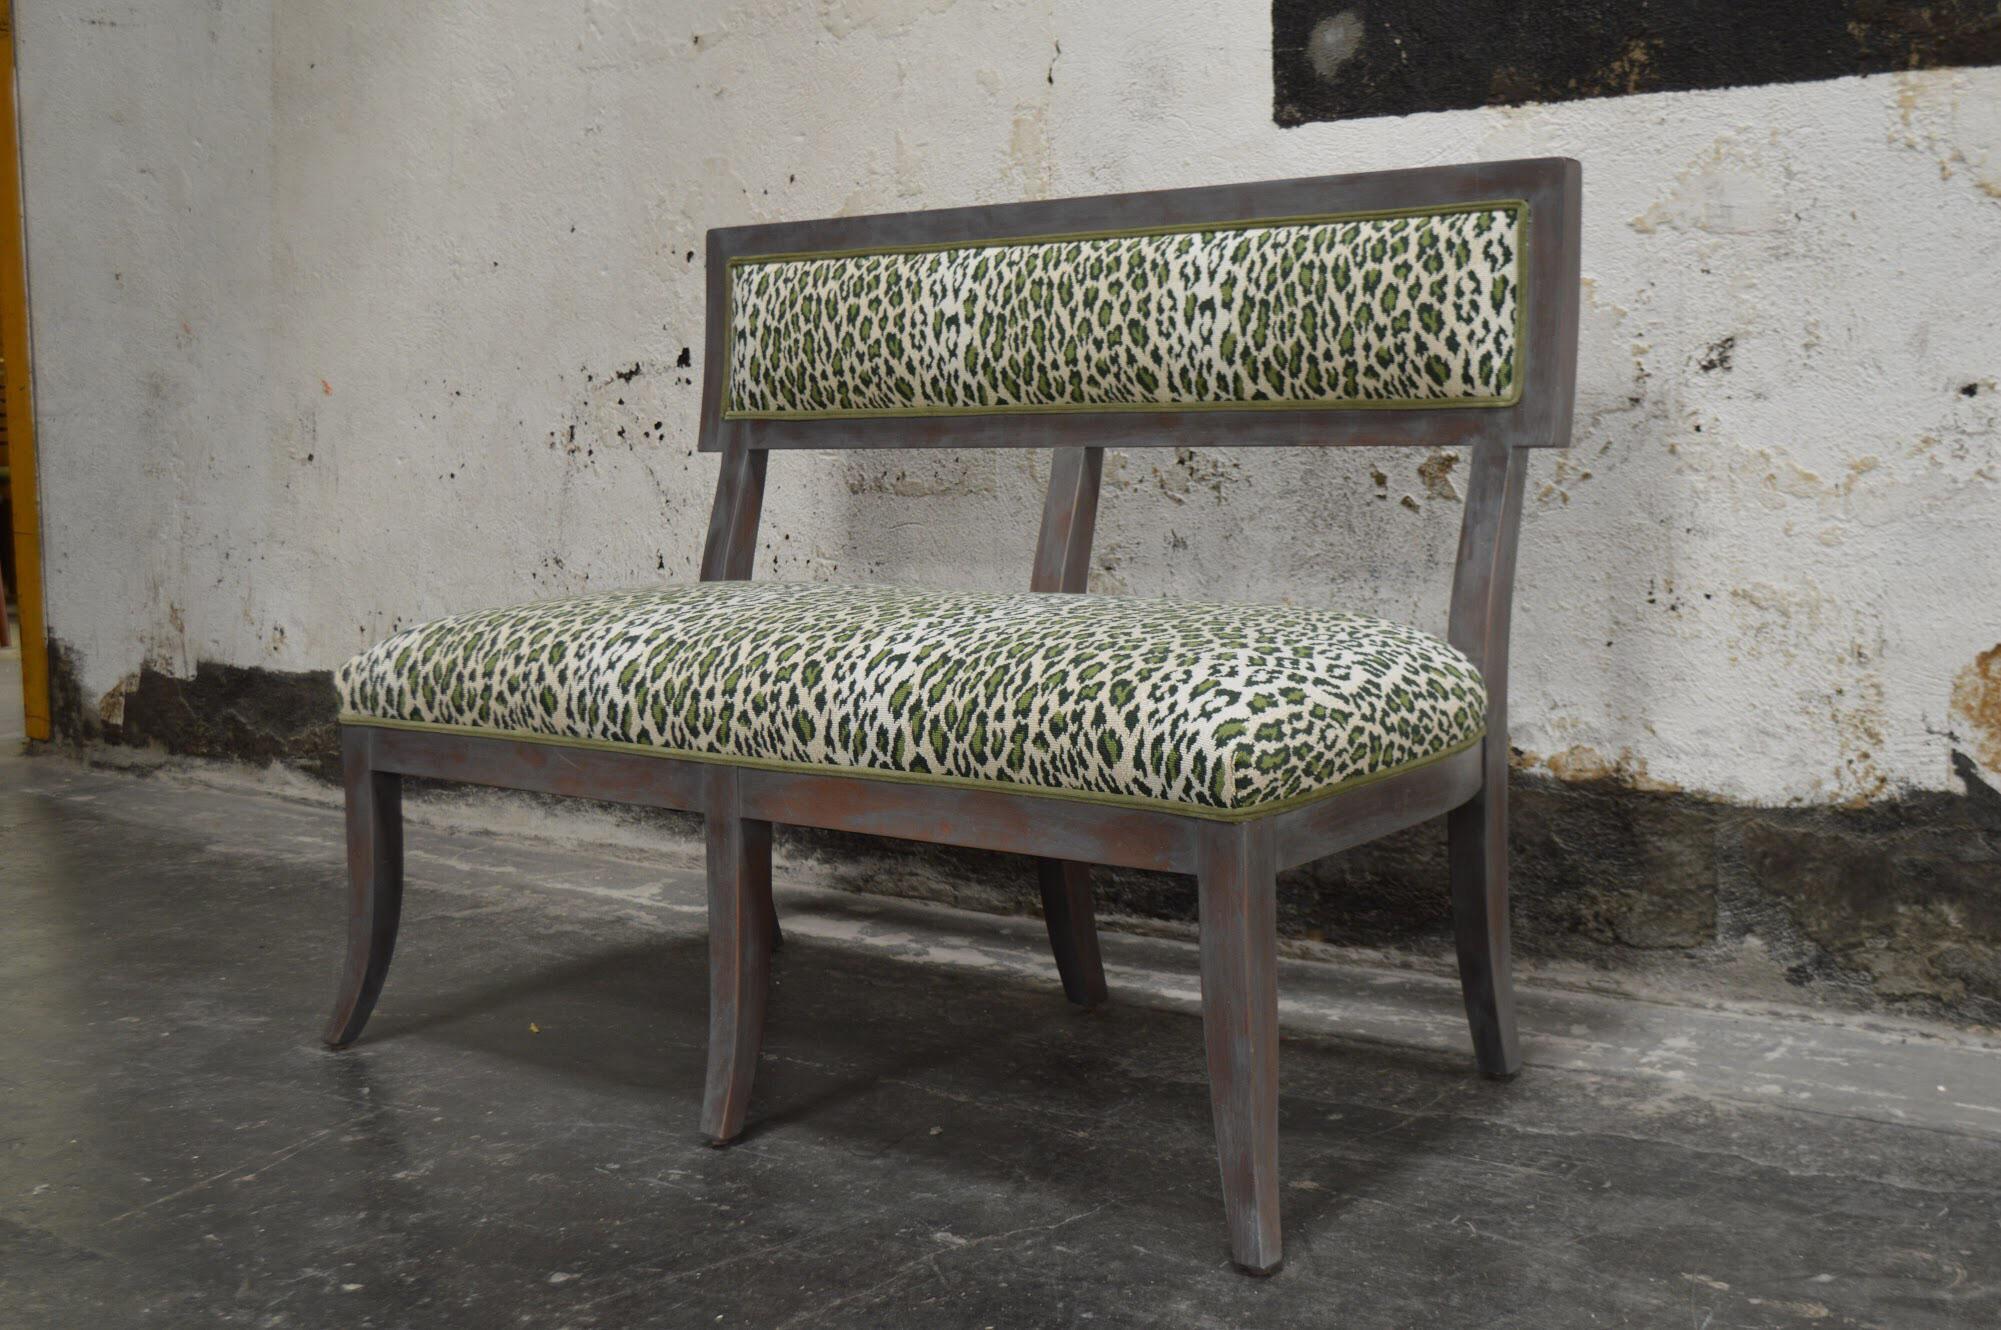 Beautifully made custom banquette or bench in distressed Swedish gray finish with green leopard grospoint fabric by Bjork Studio. In excellent condition. Perfect for an entrance, a foyer, a hallway, as a dining banquette, at the foot of a bed.